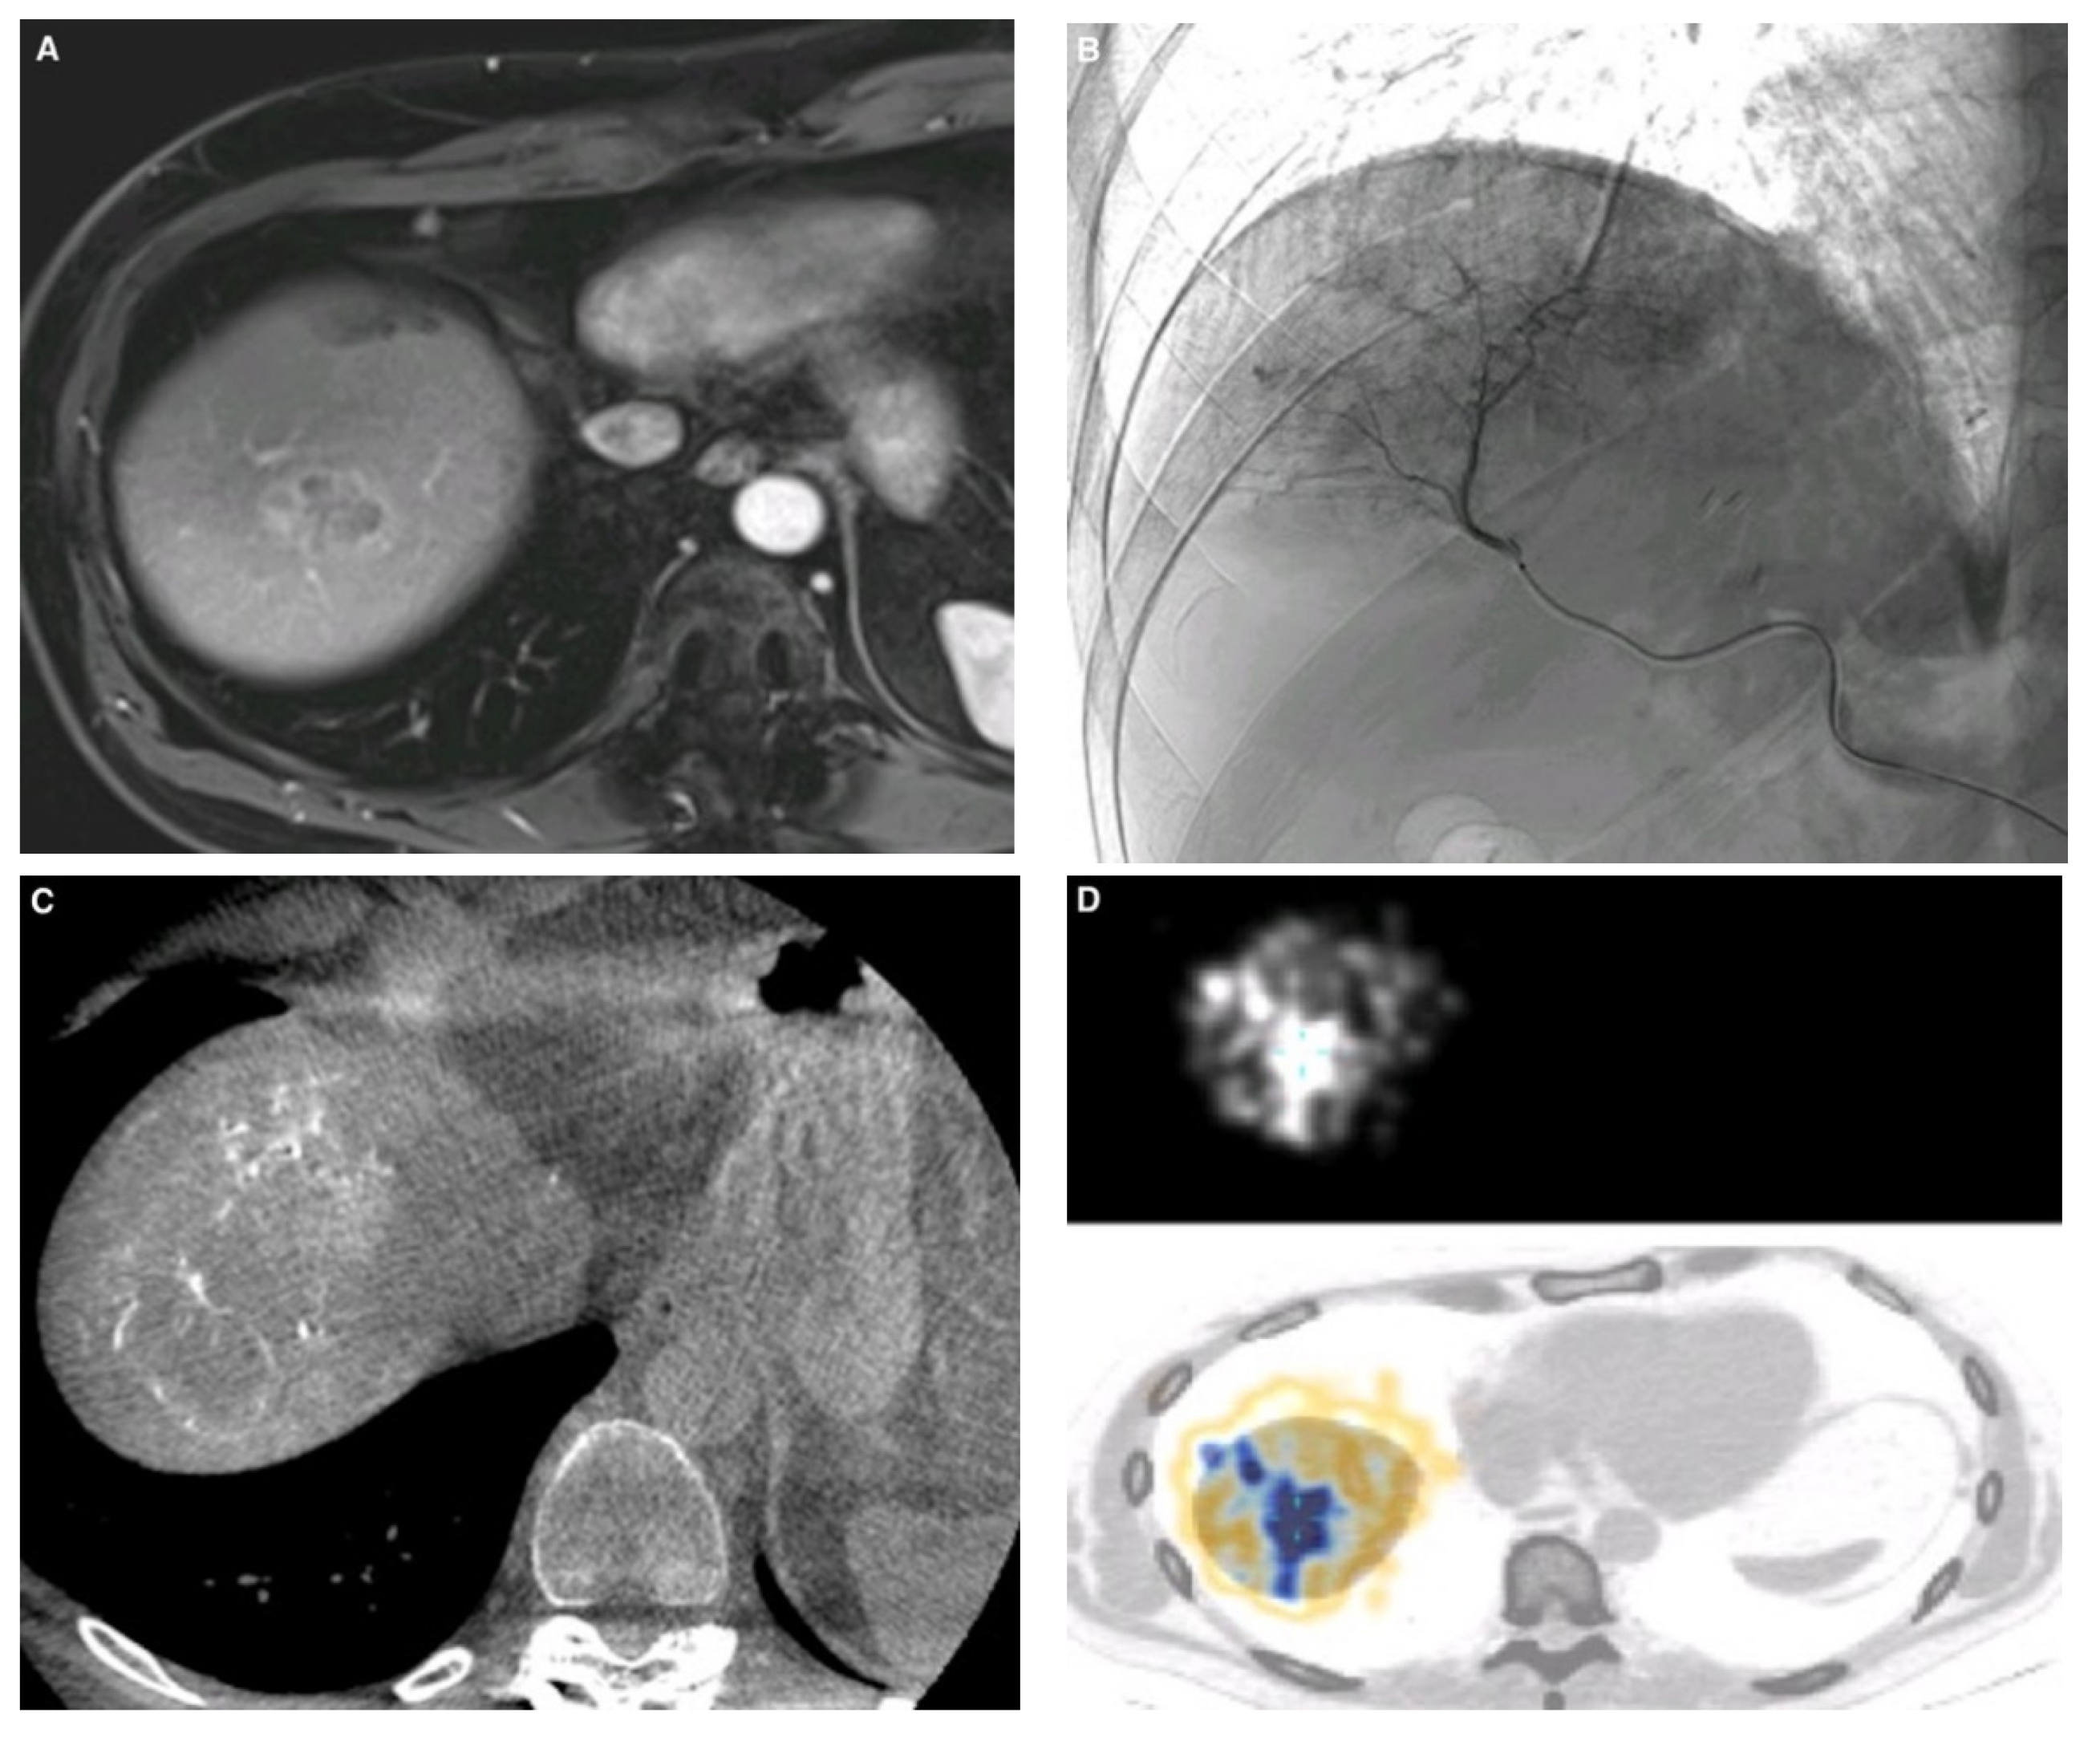 Diagnostics | Free Full-Text | Transarterial Radioembolization of  Hepatocellular Carcinoma, Liver-Dominant Hepatic Colorectal Cancer  Metastases, and Cholangiocarcinoma Using Yttrium90 Microspheres: Eight-Year  Single-Center Real-Life Experience | HTML